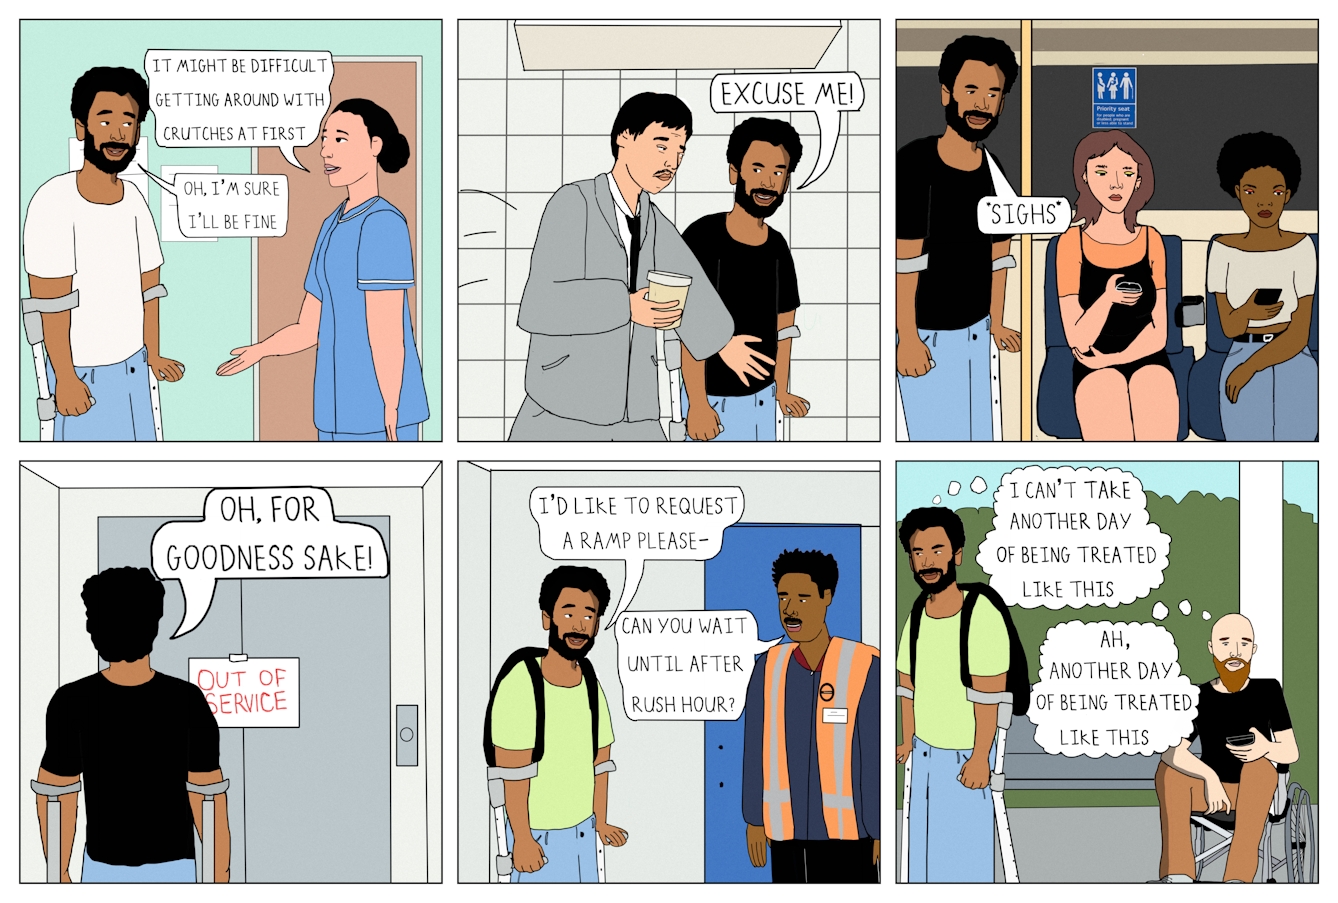 Six panel colour comic strip in a grid of 3 panels wide by 2 panels high.

The first panel shows a man on crutches talking to a female doctor in a doctor’s office. He is wearing a white t-shirt and blue jeans, and the doctor is wearing blue scrubs. Her hand is slightly outstretched towards the man. A speech bubble from her reads ‘It might be difficult getting around with crutches at first’. The man has a calm expression on his face, and a speech bubble comes from him and reads ‘Oh, I’m sure I’ll be fine’.

The second panel shows the same man and another man who is wearing a suit and tie and holding a hot drink. The second man is pushing past the man on crutches, with his left arm outstretched in front of him. The man on crutches is looking at the man in the suit. A speech bubble from him reads ‘Excuse me!’.

The third panel shows the same man on crutches and two women on the London underground. The two women are both sitting down and looking intently at their phones. There is a priority seat sign behind the woman sitting closest to the man. The man is standing up and looking at the two women. He looks frustrated. A speech bubble from him reads ‘*Sighs*’. 

The fourth panel shows the same man standing outside of a lift. A sign on the lift reads ‘Out of service’. A speech bubble from the man reads ‘Oh, for goodness sake!’ 

The fifth panel shows the same man talking to a male Transport for London employee. The man on crutches is wearing a black rucksack, and the Transport for London employee is wearing a high-vis vest and a name badge. They are stood facing each other in front of a blue door. A speech bubble from the man on crutches reads ‘I’d like to request a ramp please-’. A speech bubble from the Transport for London employee reads ‘Can you wait until after rush hour?’ 

The sixth panel shows the same man on crutches and a man in a wheelchair outdoors. The man on crutches has an angry facial expression and is turned away from the man in the wheelchair. A thought bubble from him reads ‘I can’t take another day of being treated like this’. A thought bubble from the man in the wheelchair reads ‘Ah, another day of being treated like this’. 